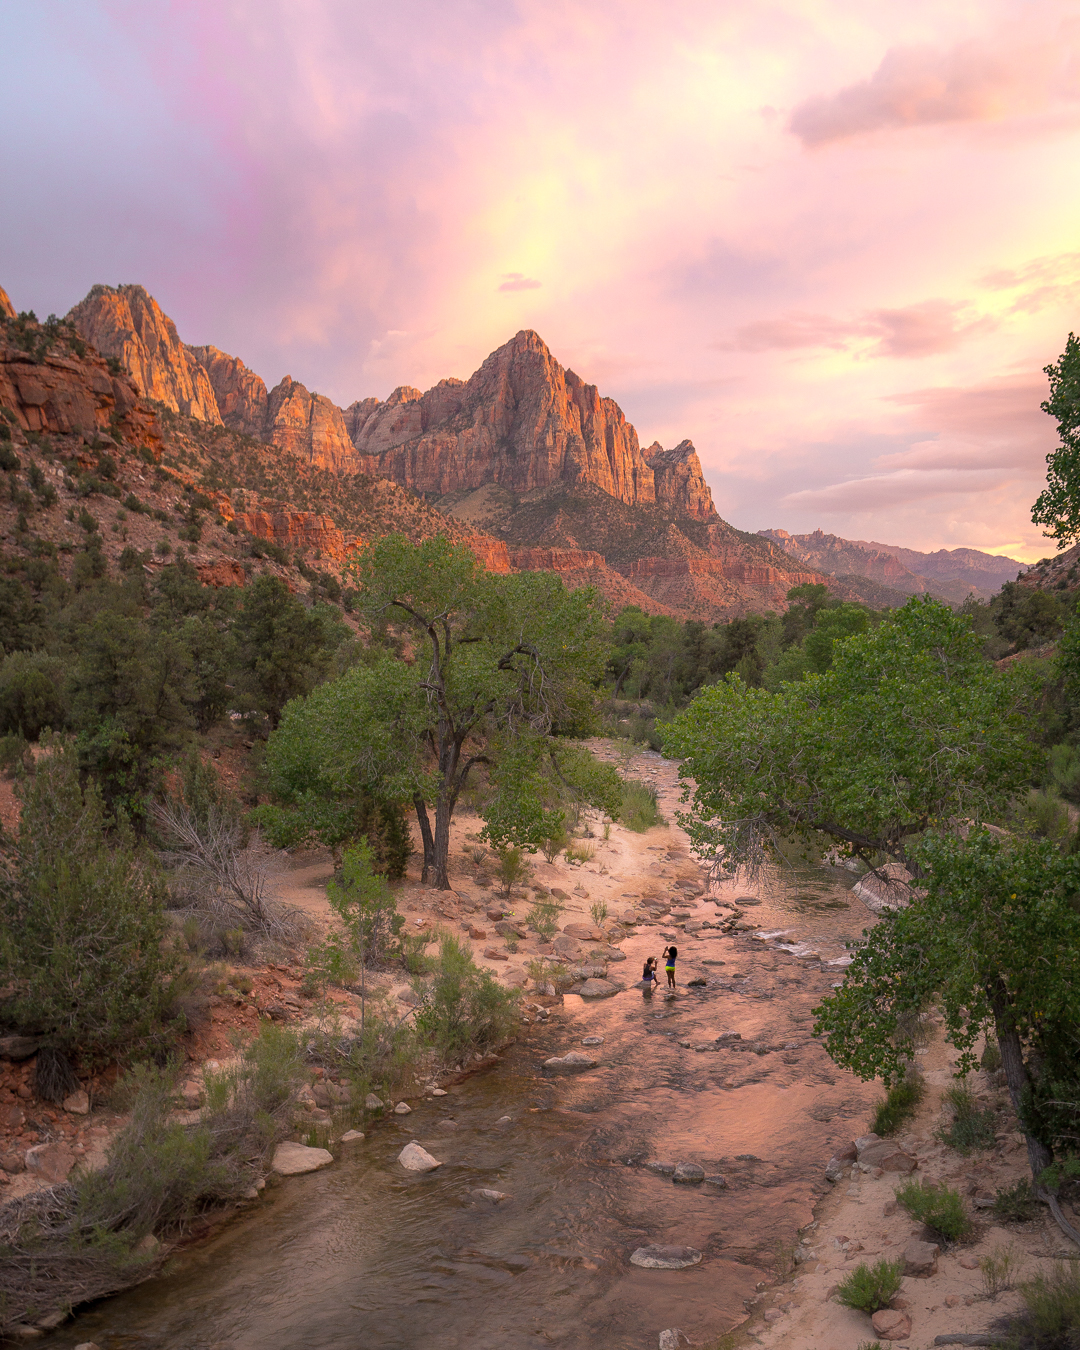 Sunset at Zion National Park.